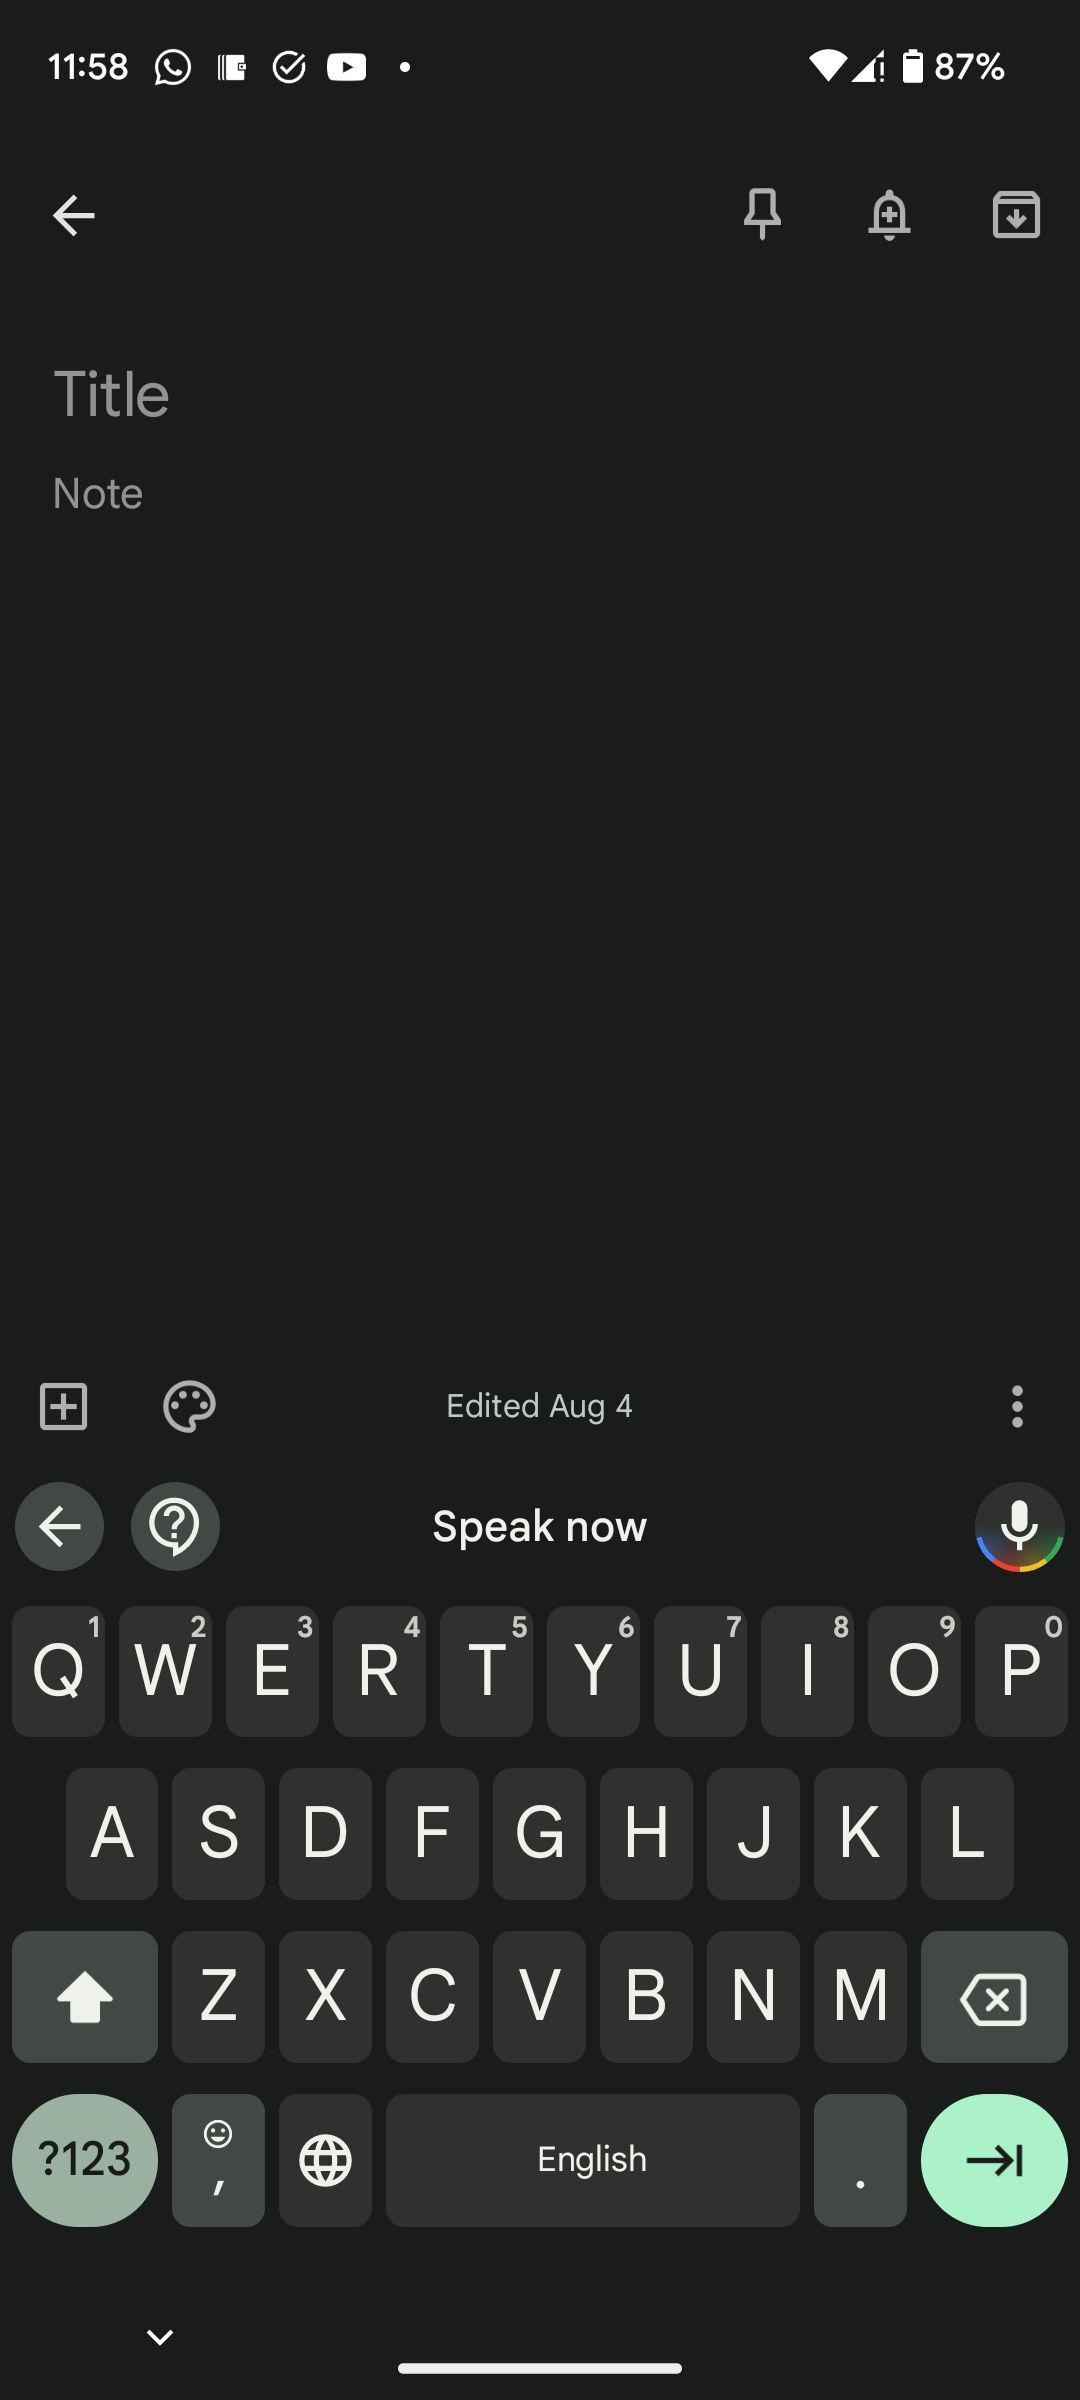 Voice typing activated on Android